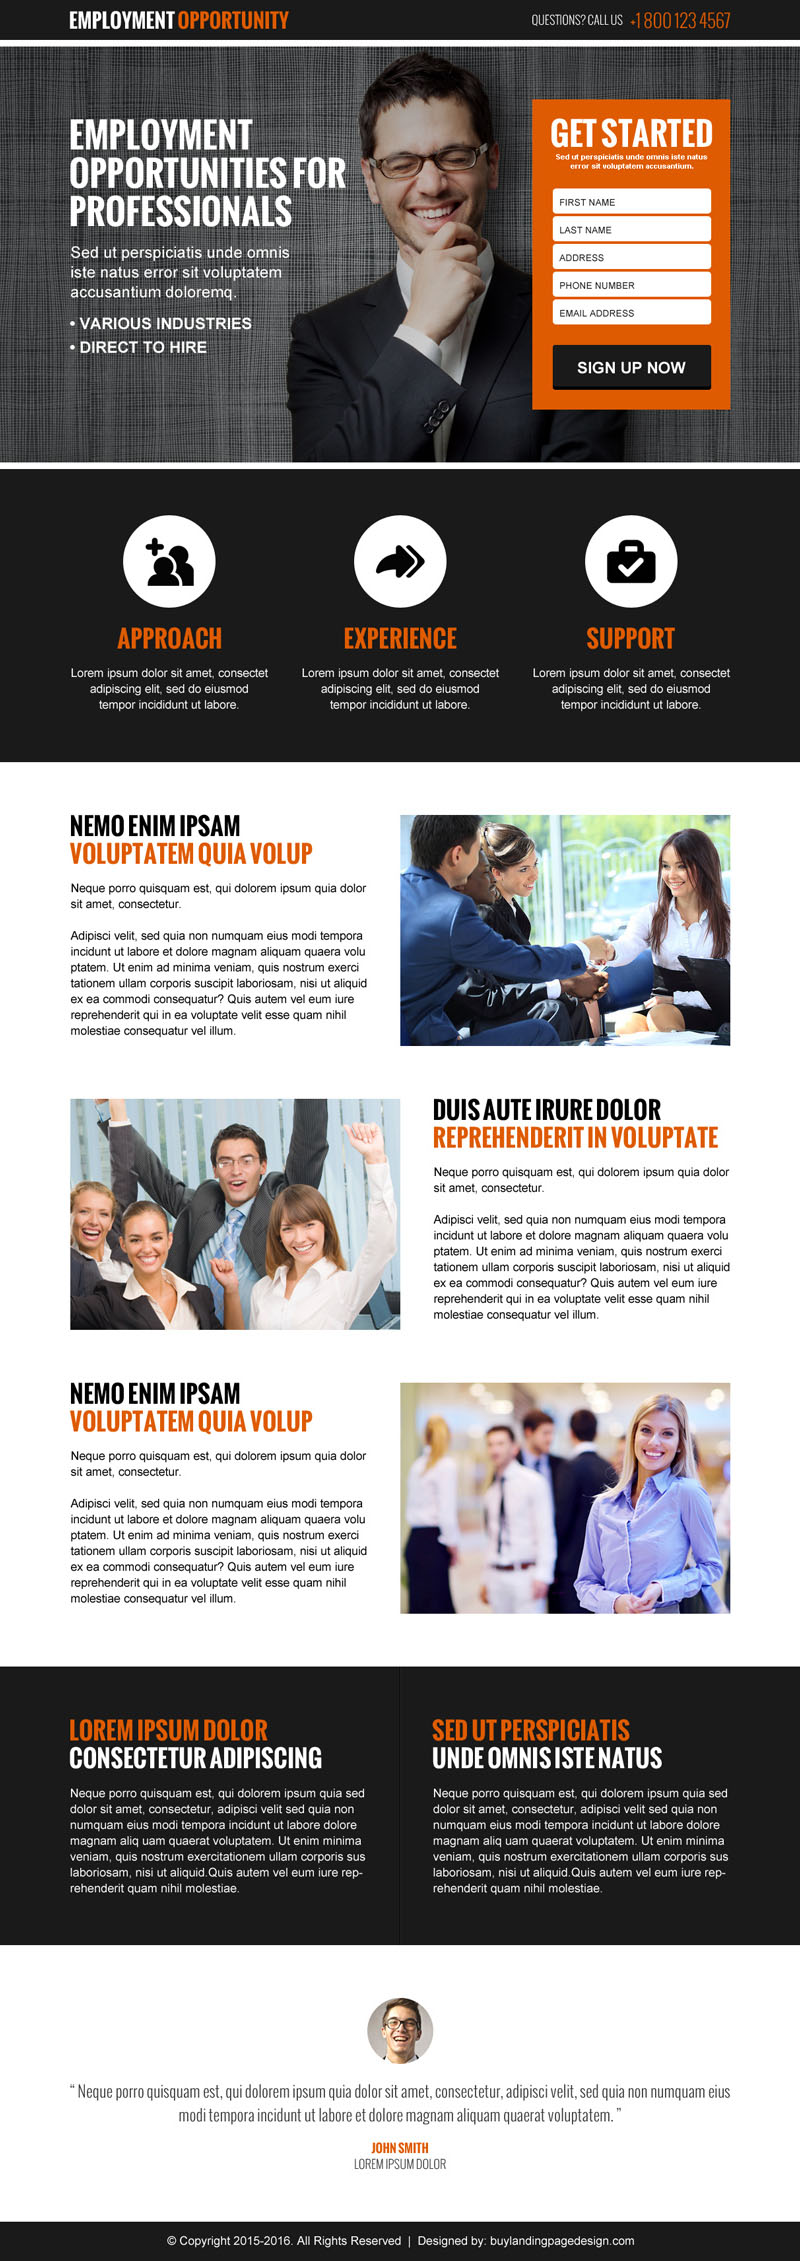 employment-opportunity-lead-generation-responsive-landing-page-design-template-001